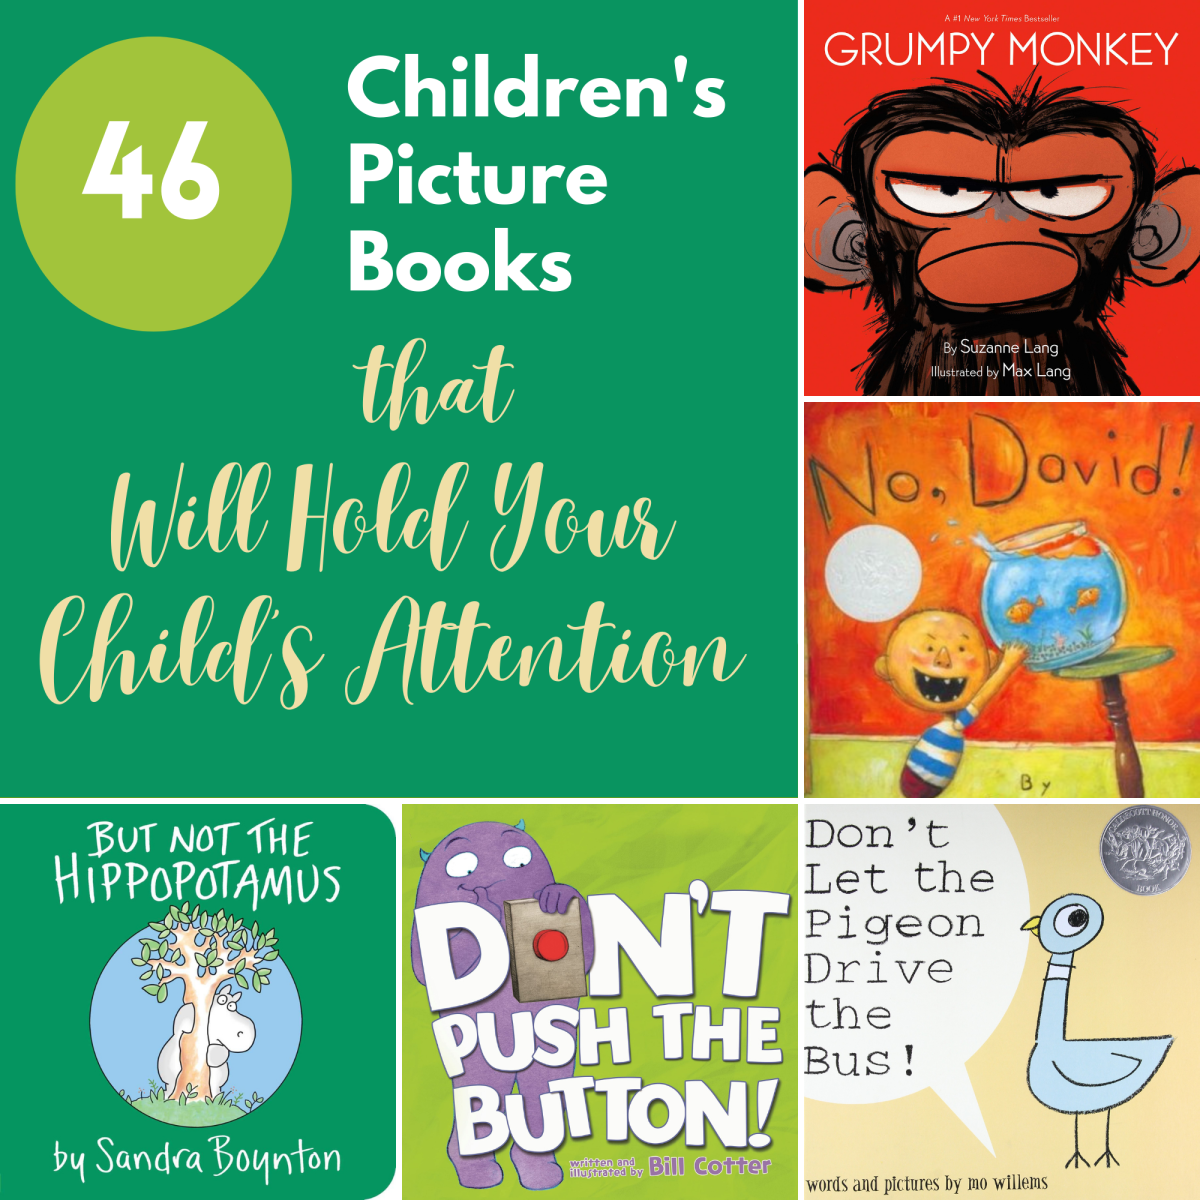 46 Children's Picture Books that Will Hold Your Child's Attention